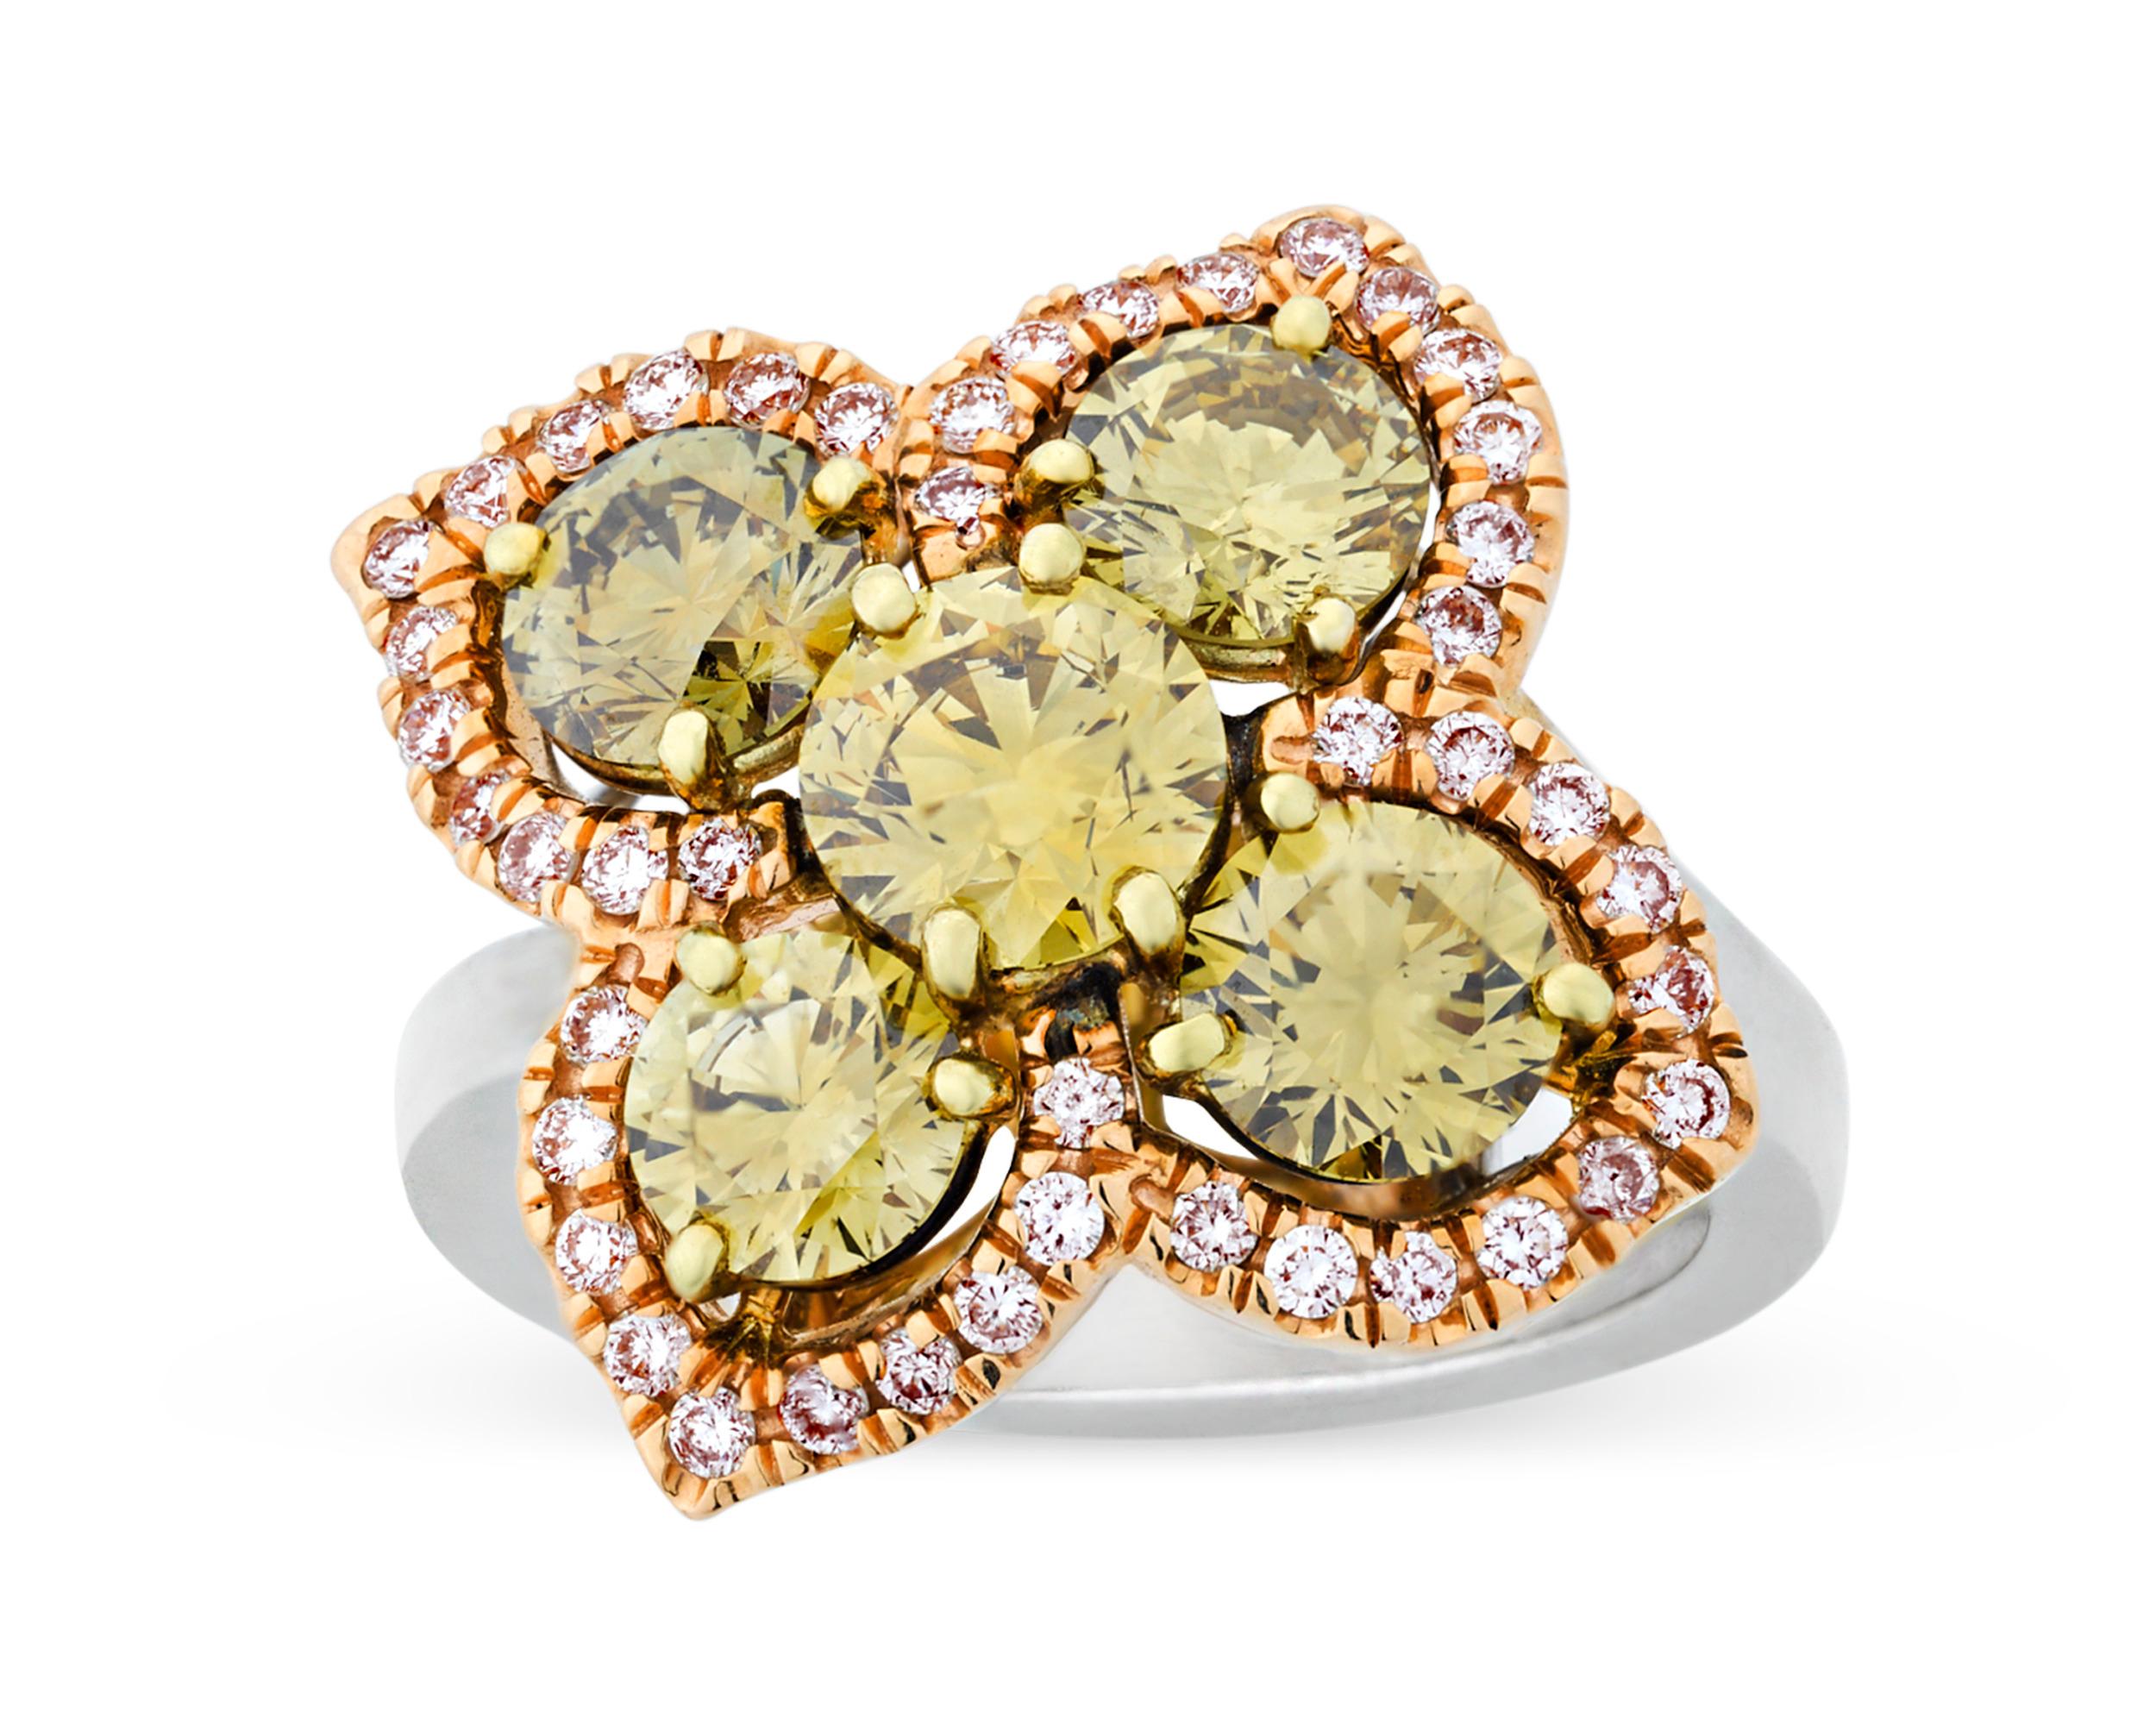 Chameleon diamonds are the rarest and most sought after of the fancy colored diamonds, and they are the only natural colored diamonds with the ability to change color. This stunning floral-shaped ring contains not one, but five of these remarkably